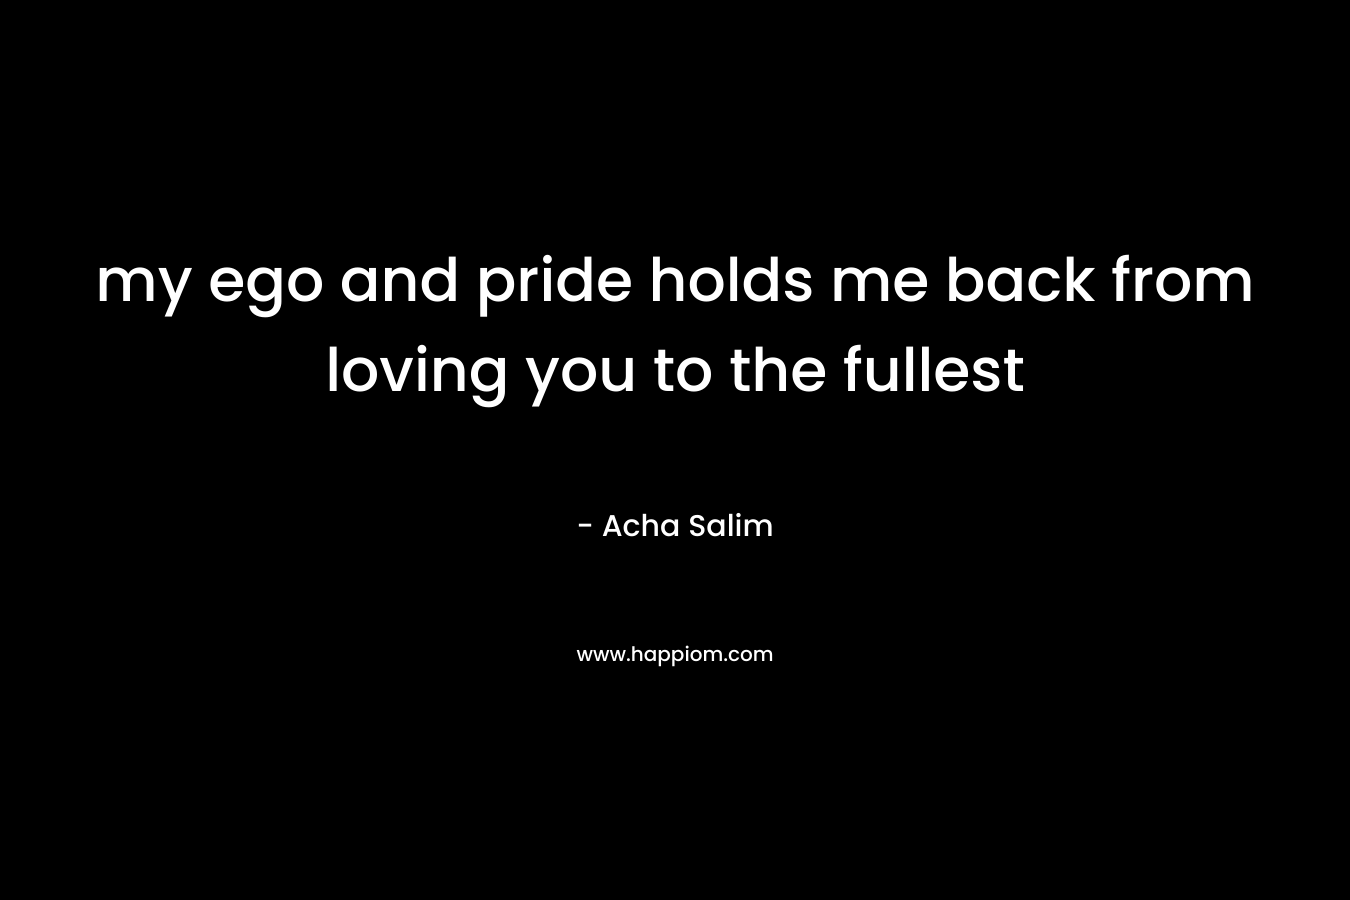 my ego and pride holds me back from loving you to the fullest